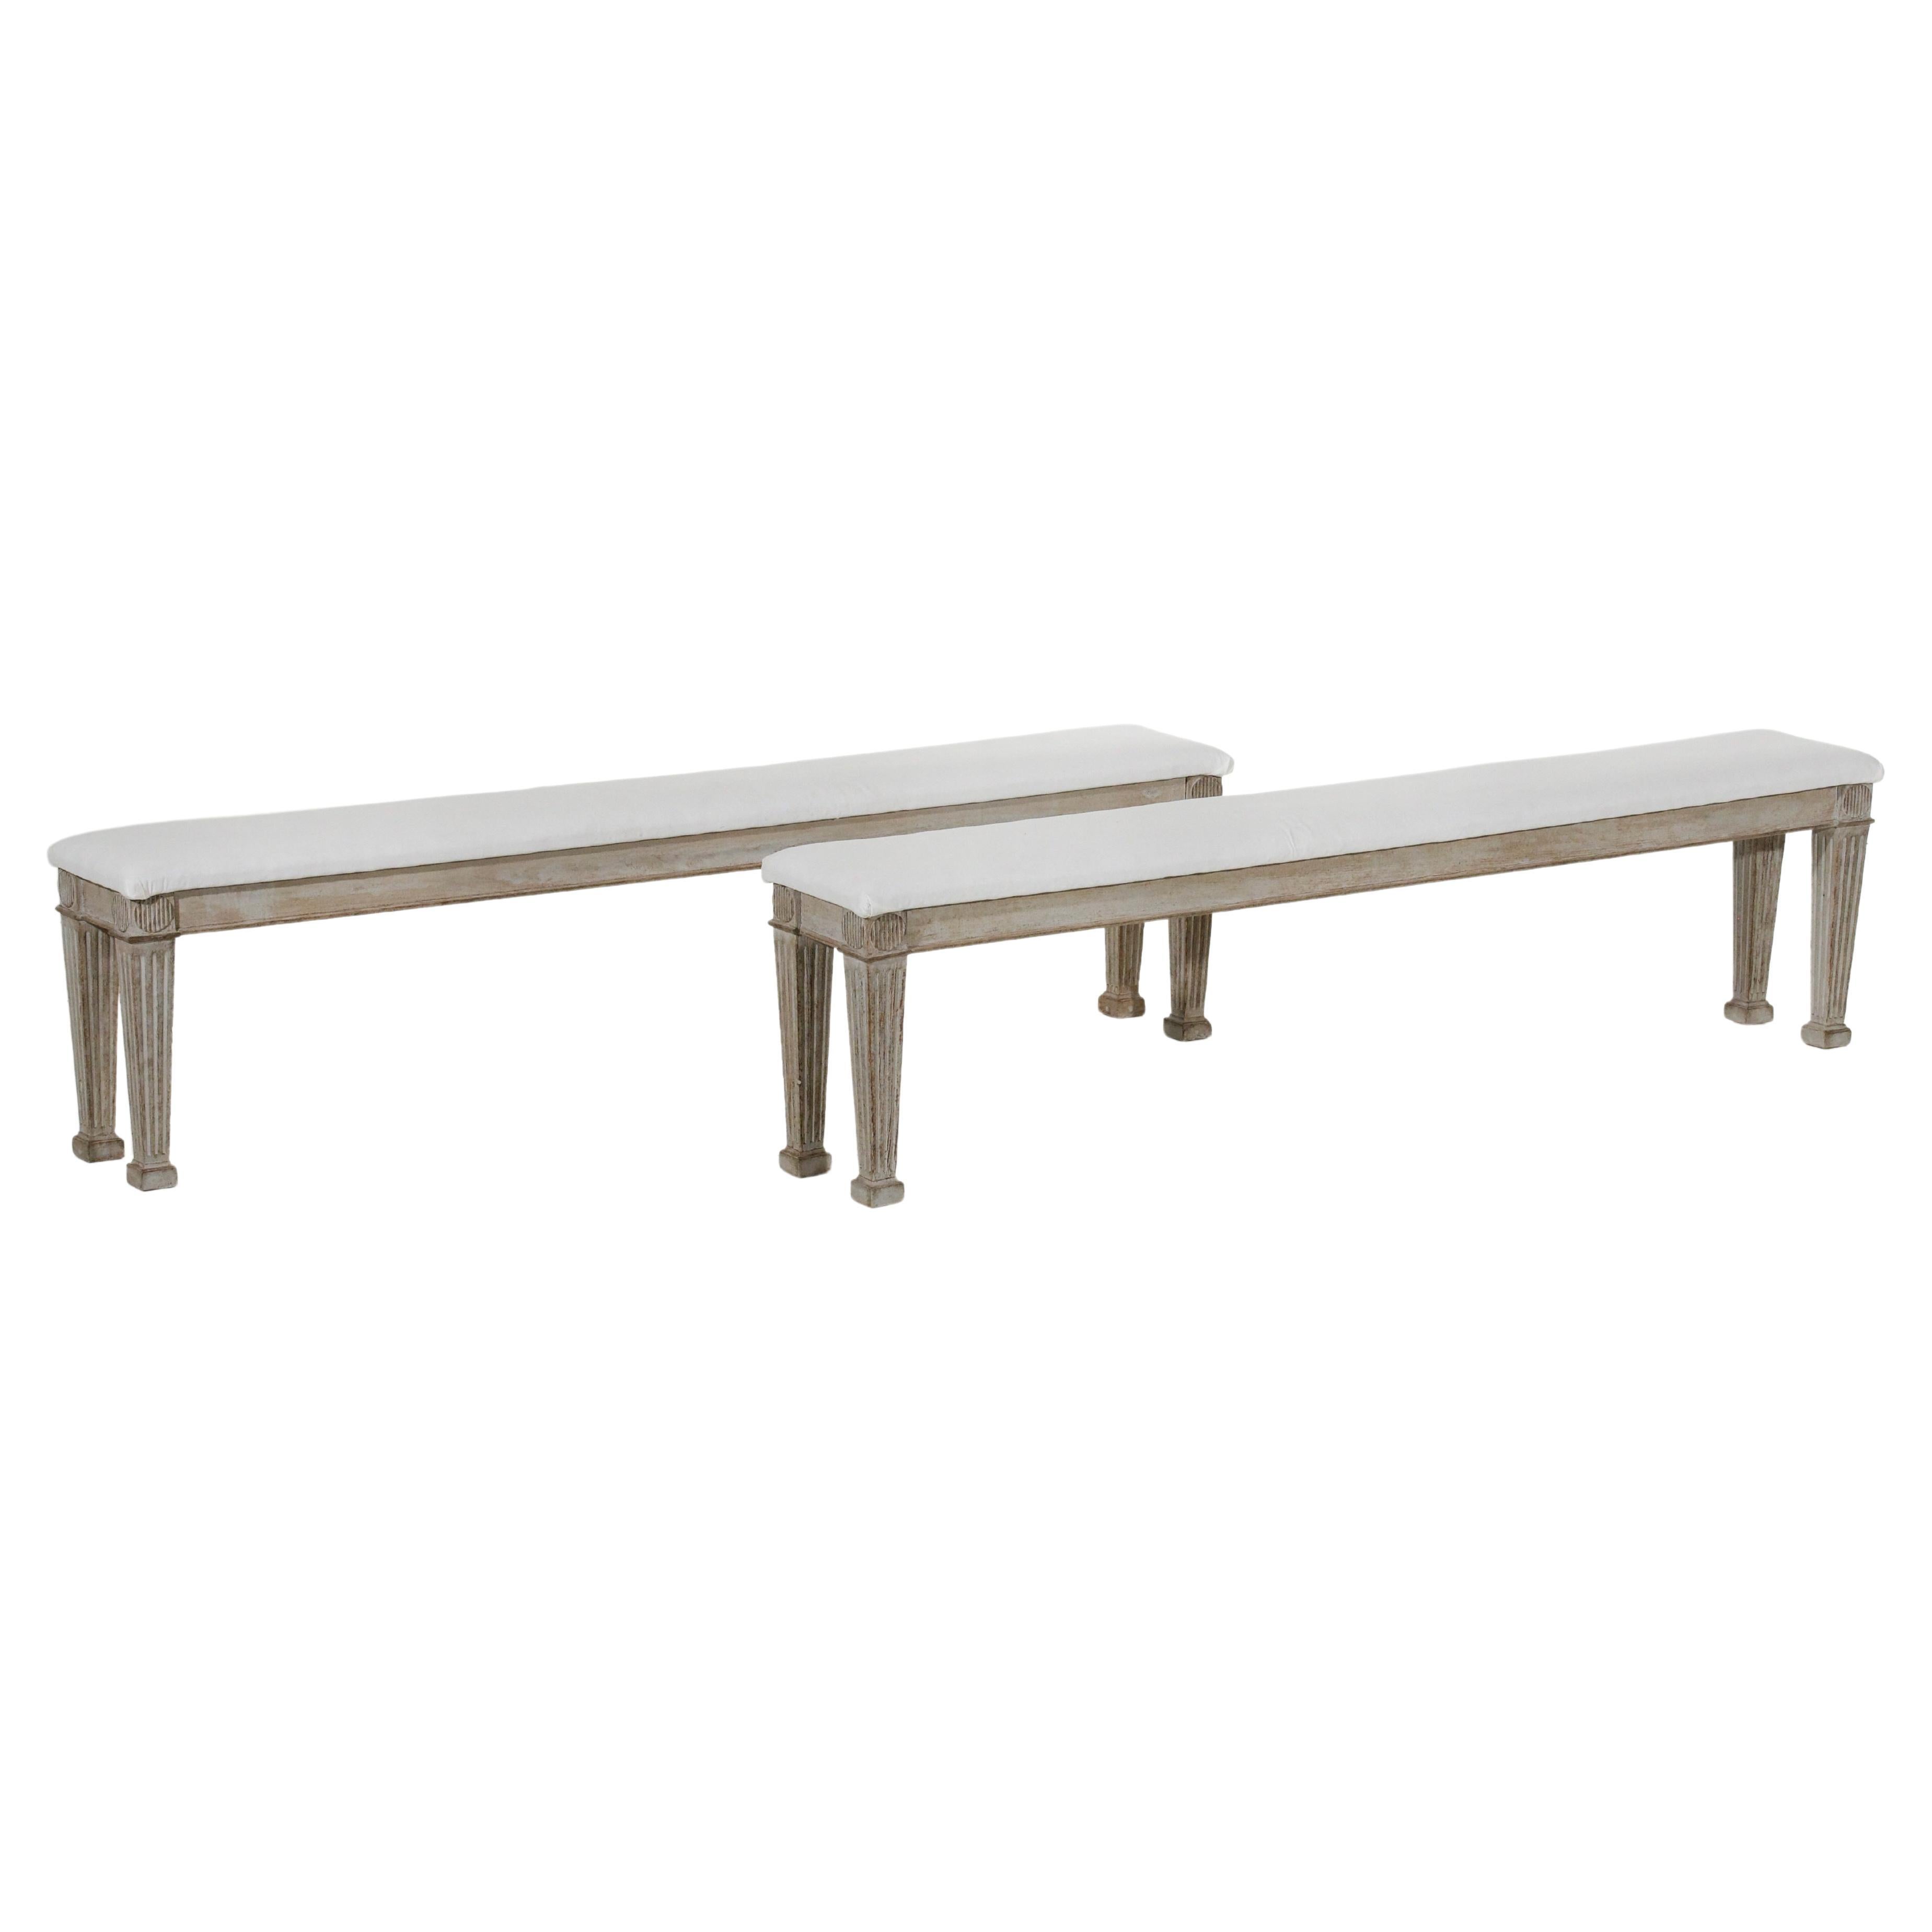 Rare pair of Danish freestadning long-benches, made for Danish castle, 19th C. For Sale